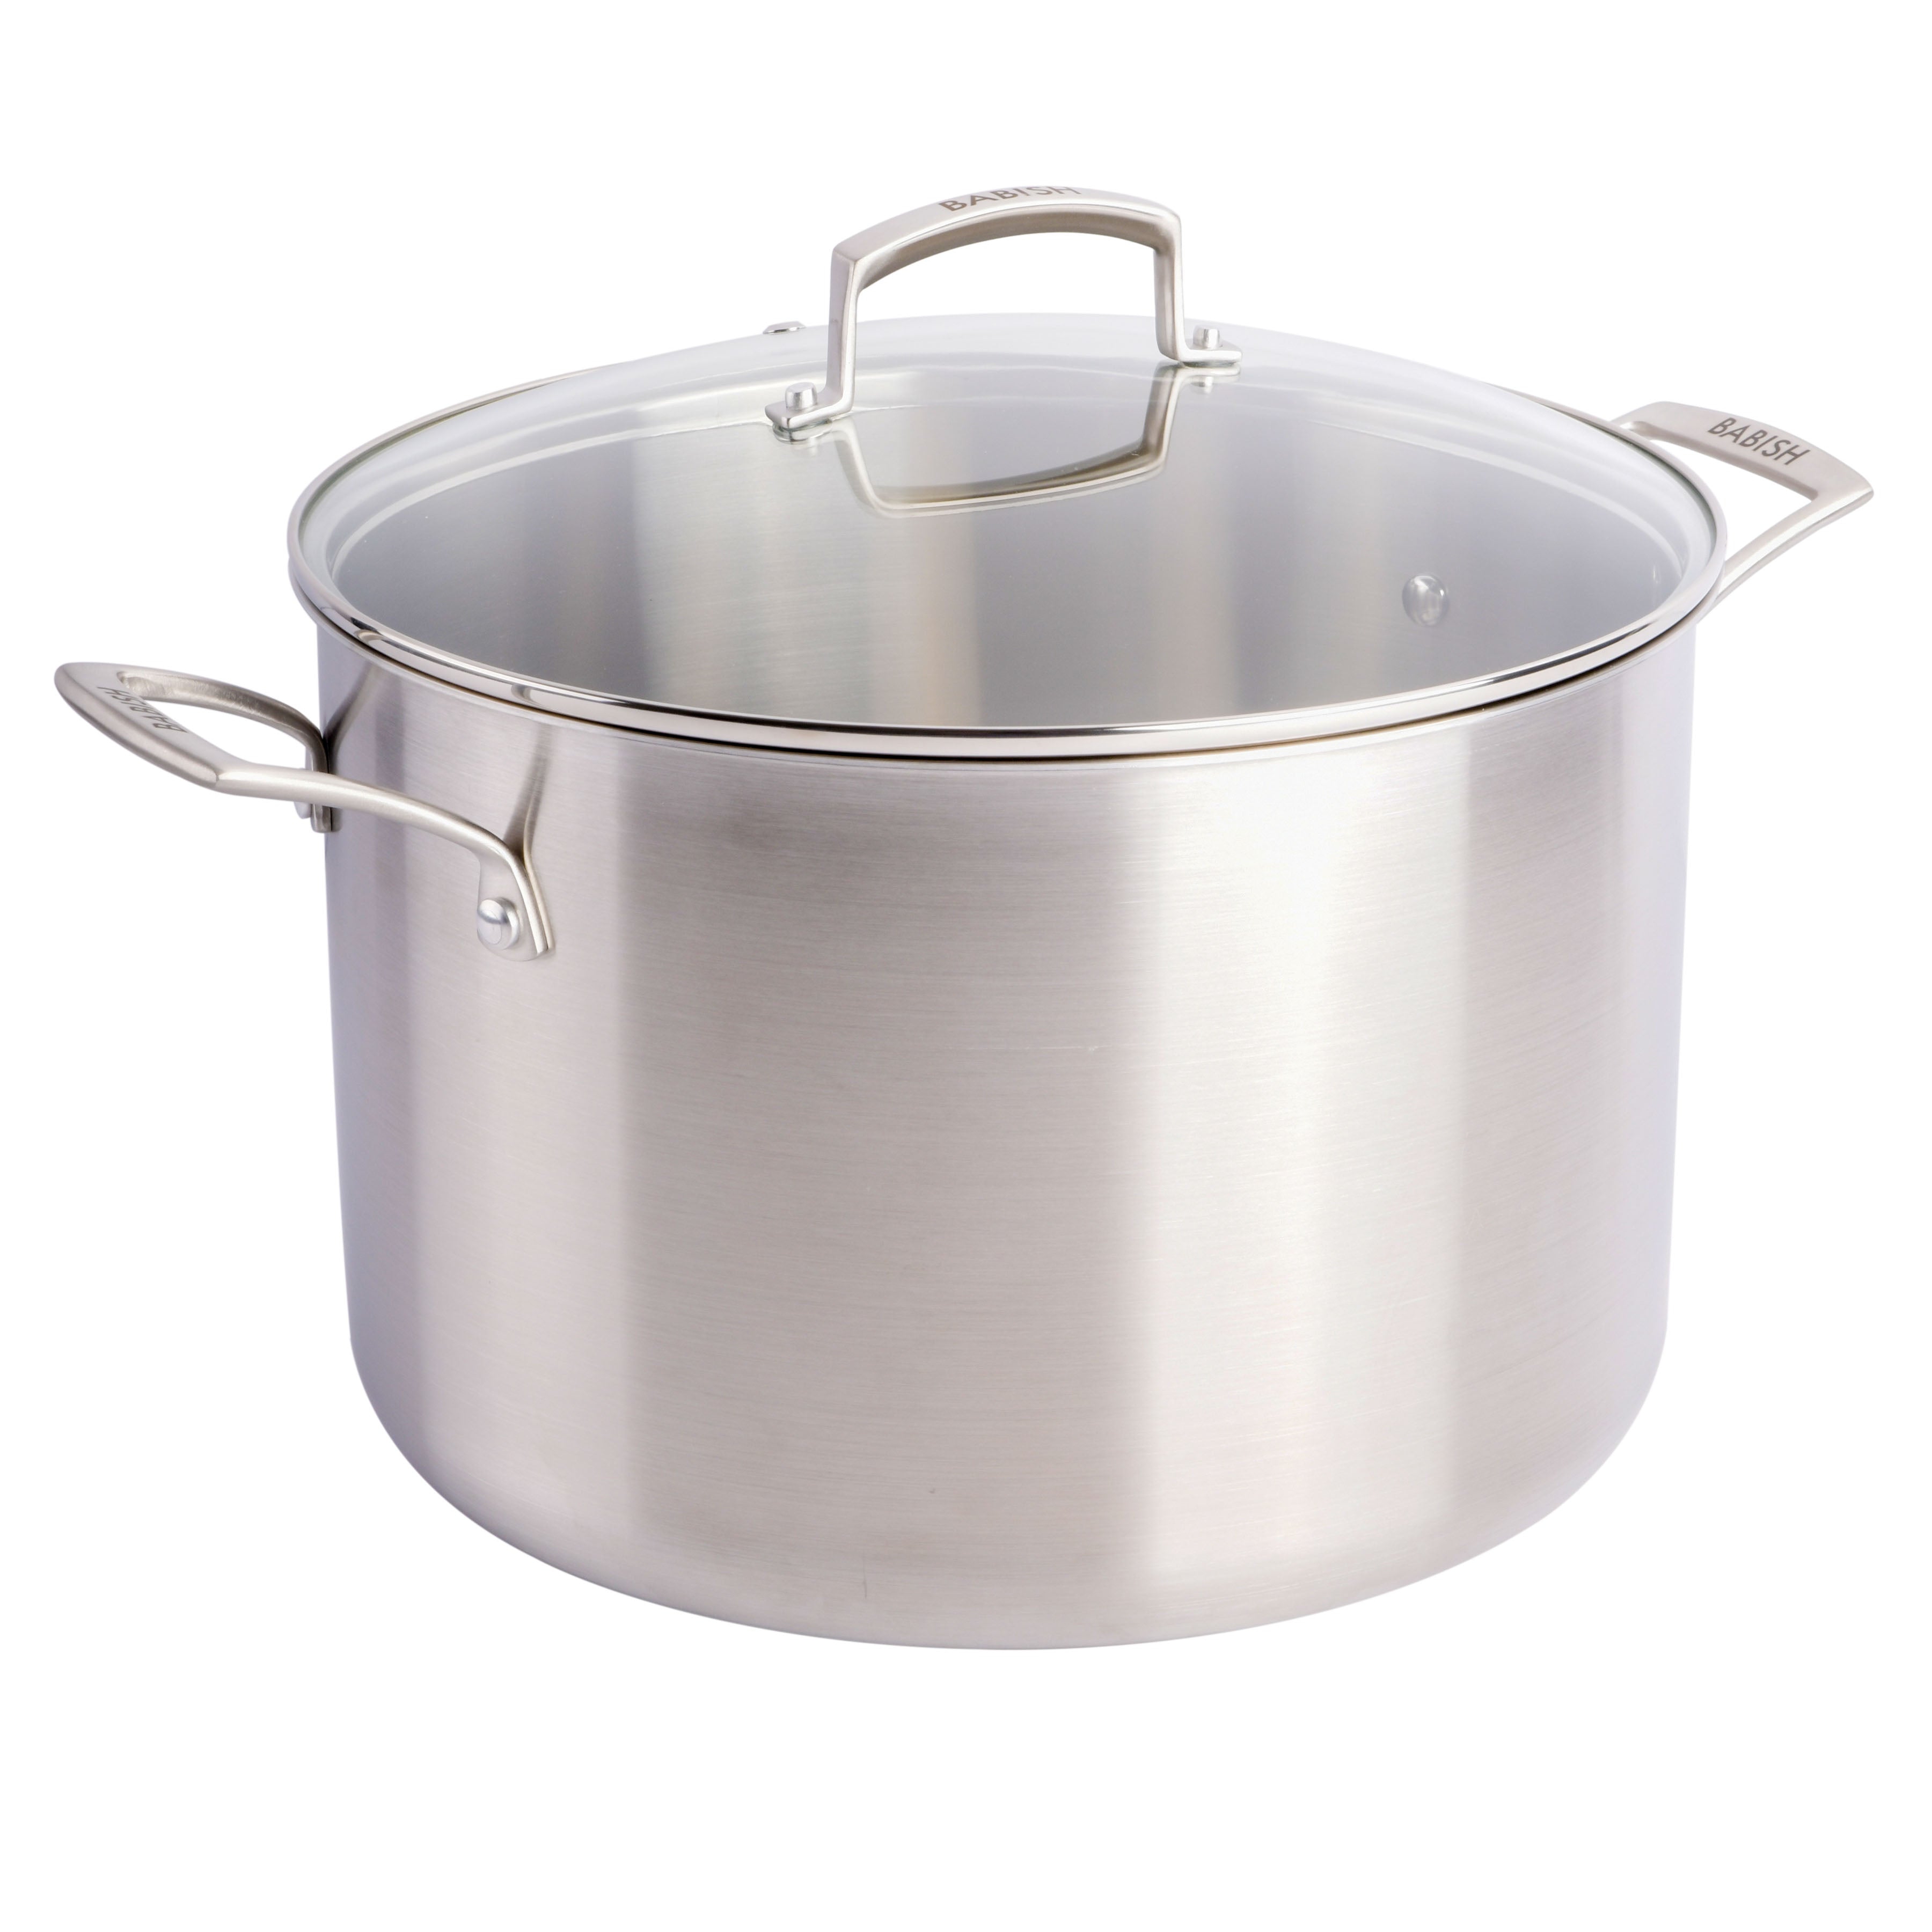 Babish Tri-Ply Stainless Steel Professional Grade Stock Pot w/Lid, 12-Quart